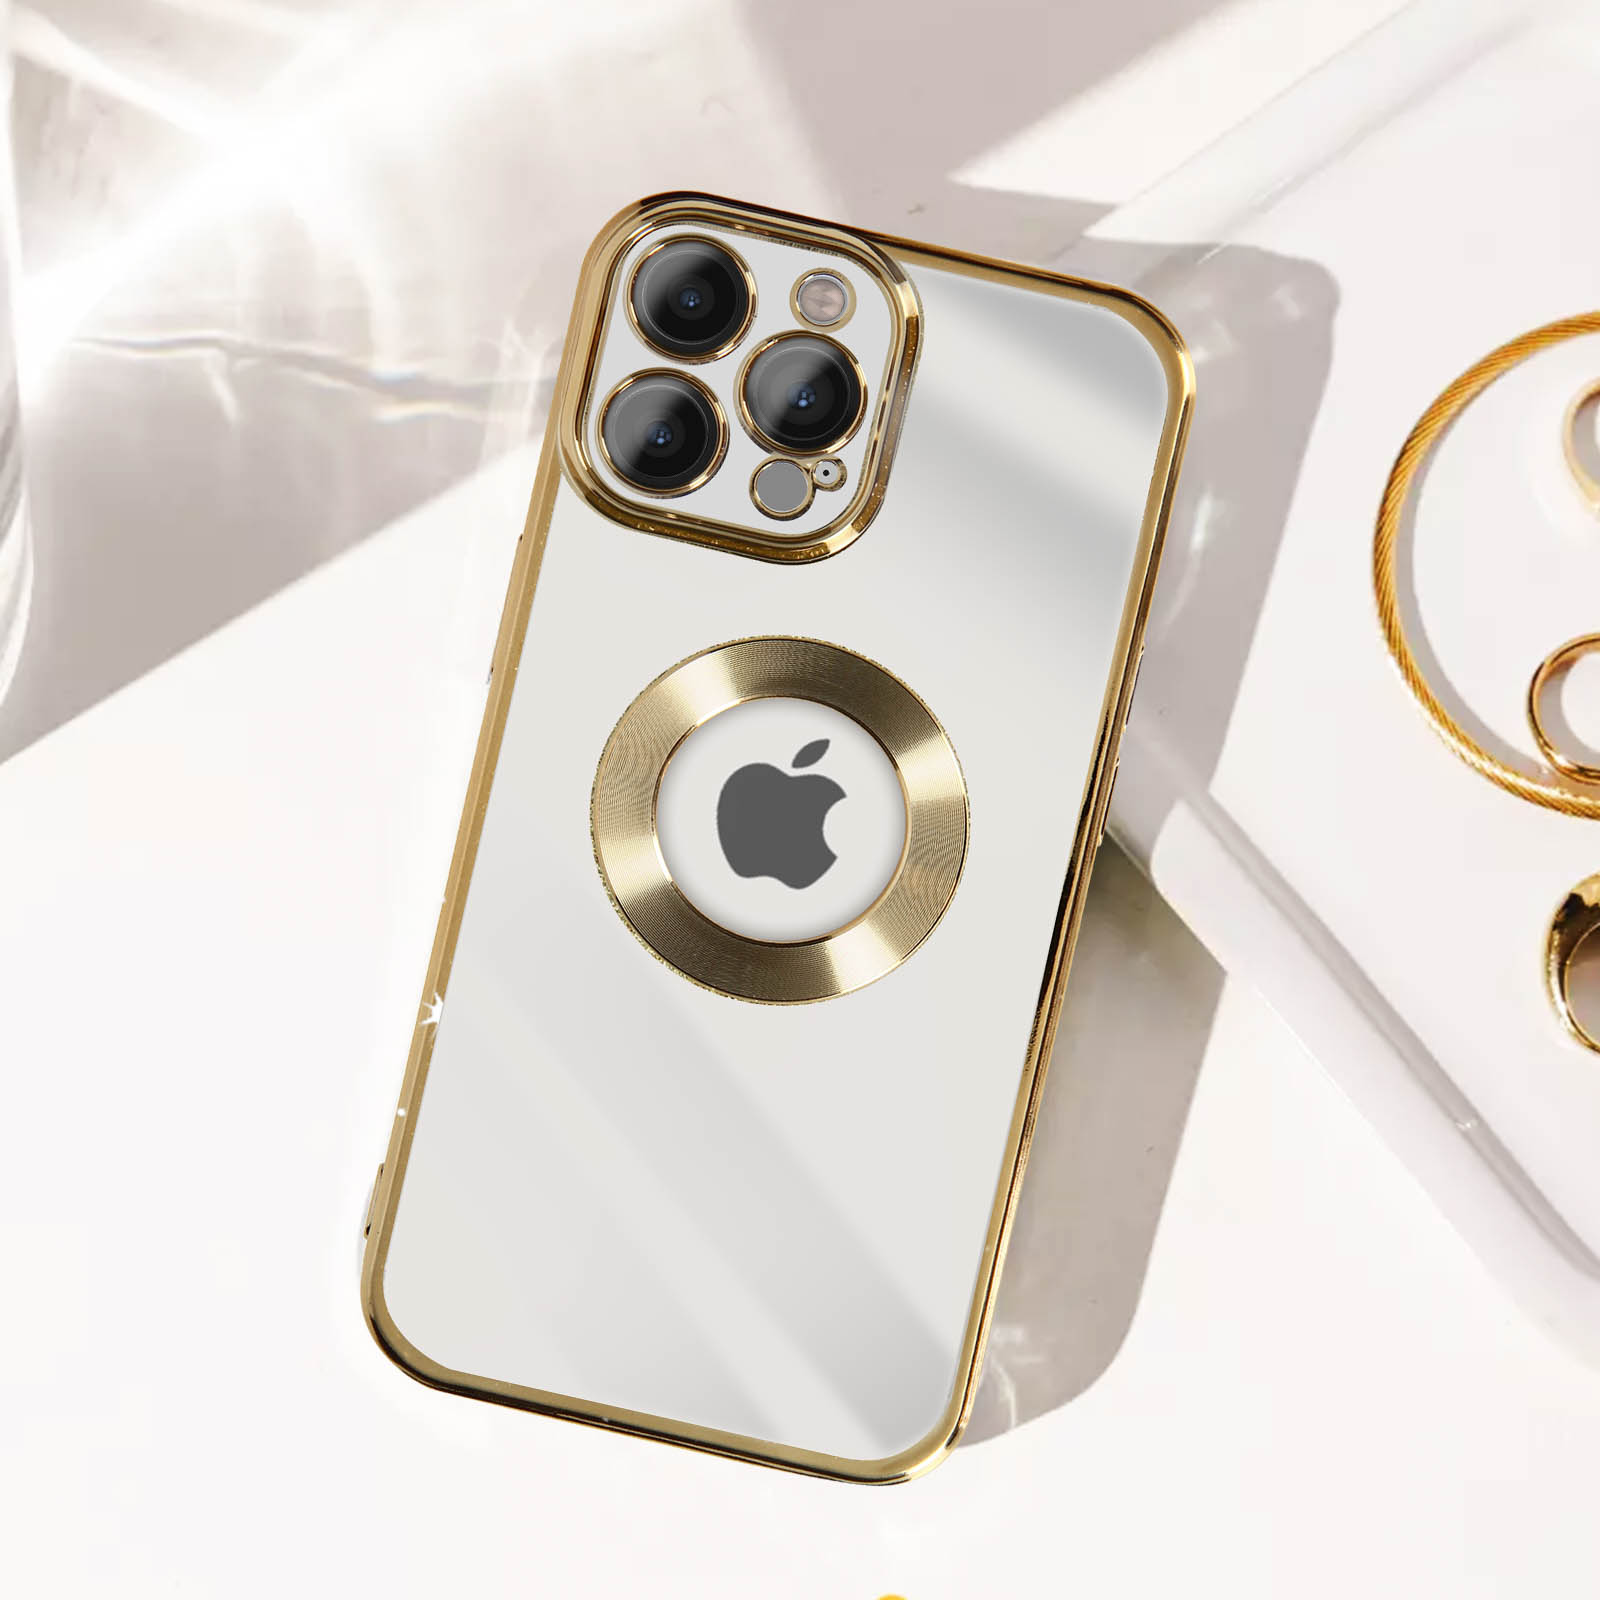 Gold Pro Spark Backcover, Protecam Series, Apple, 12 Max, AVIZAR iPhone